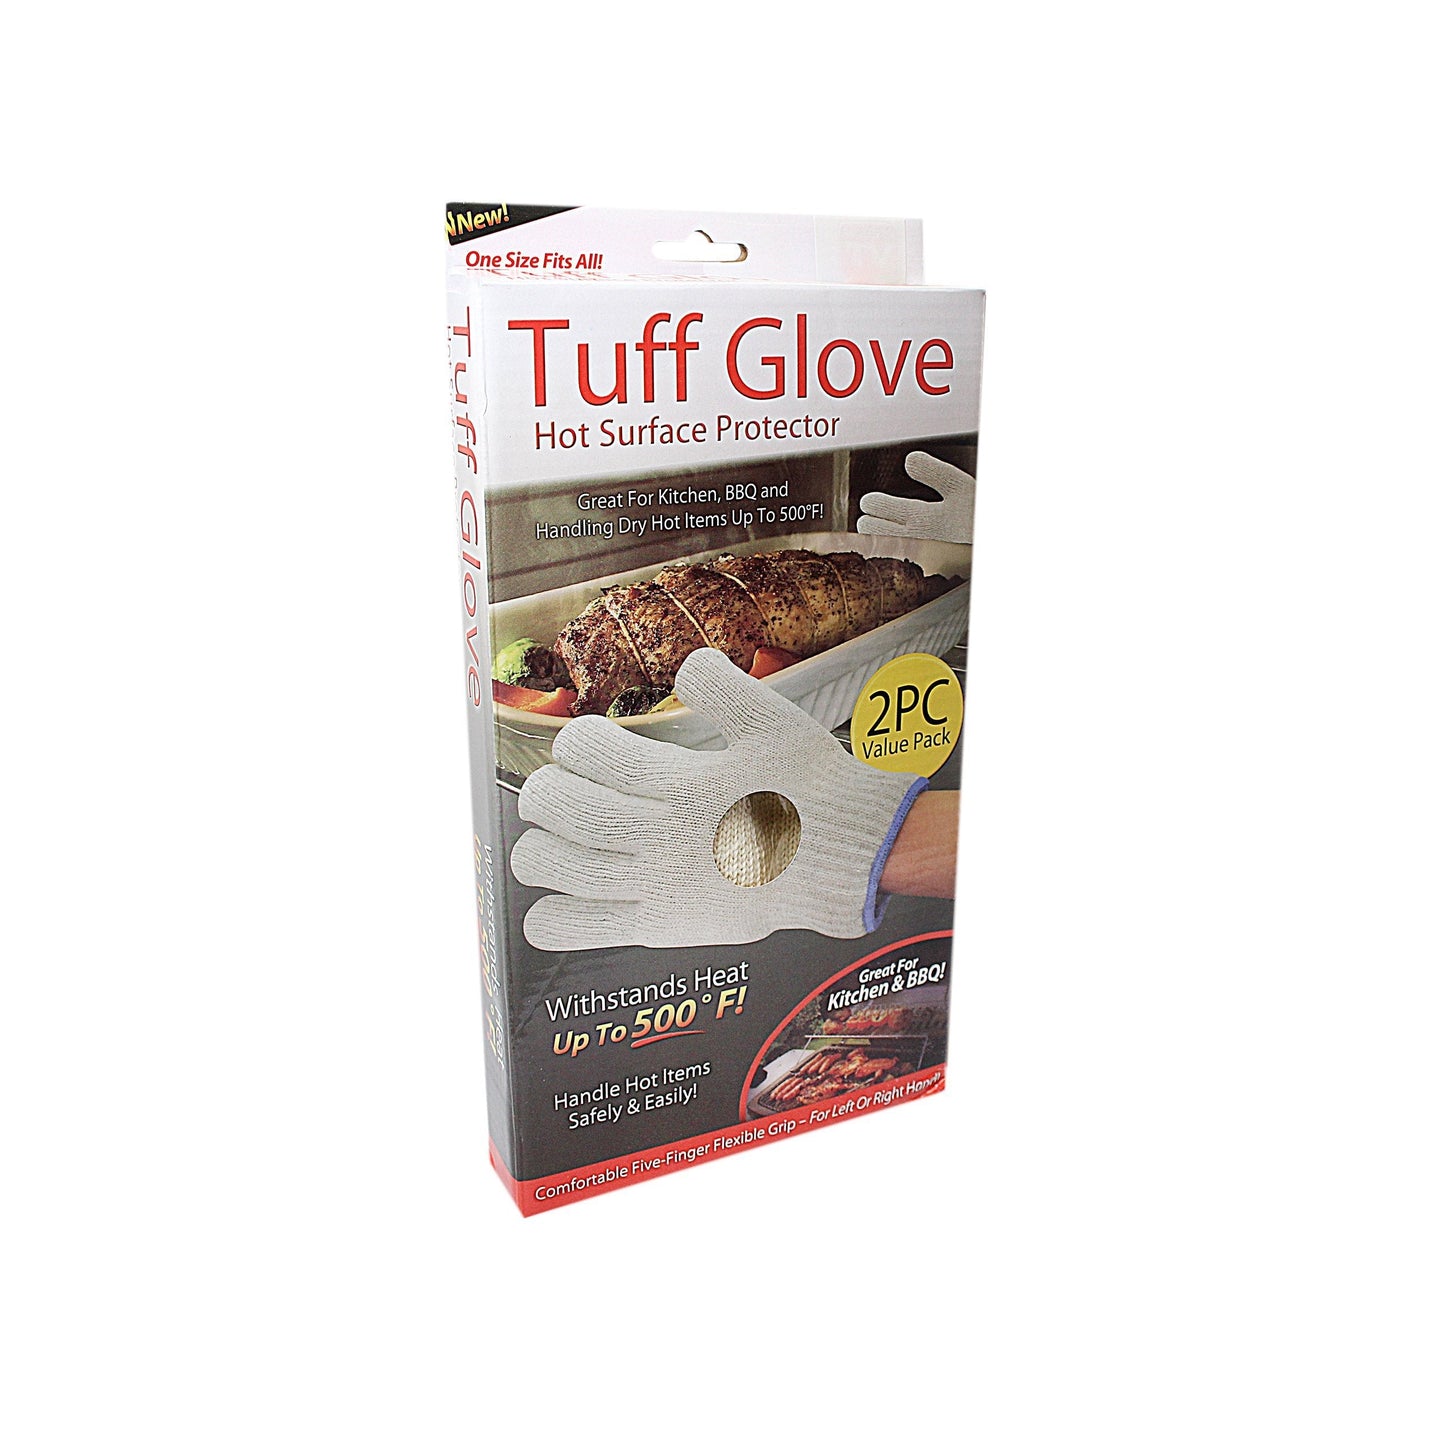 Tuff Glove Oven Glove Mitts 2pc Withstands Heat Hot Surface Protector Home Kitchen 4504 (Parcel Rate)p